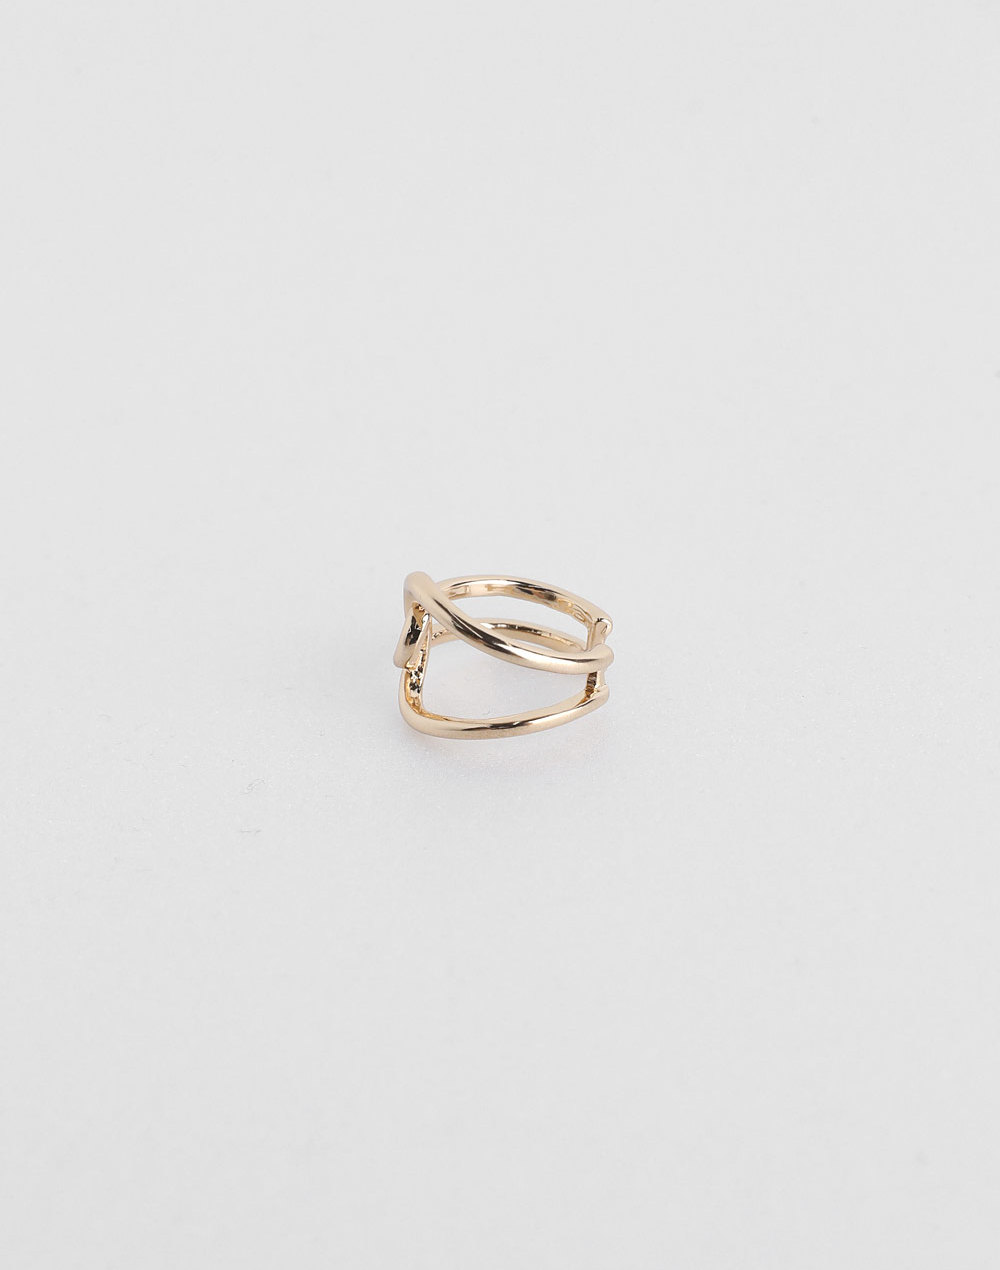 Double Line Ring・d280873（ジュエリー/リング）| shiho_takechi | 東京ガールズマーケット